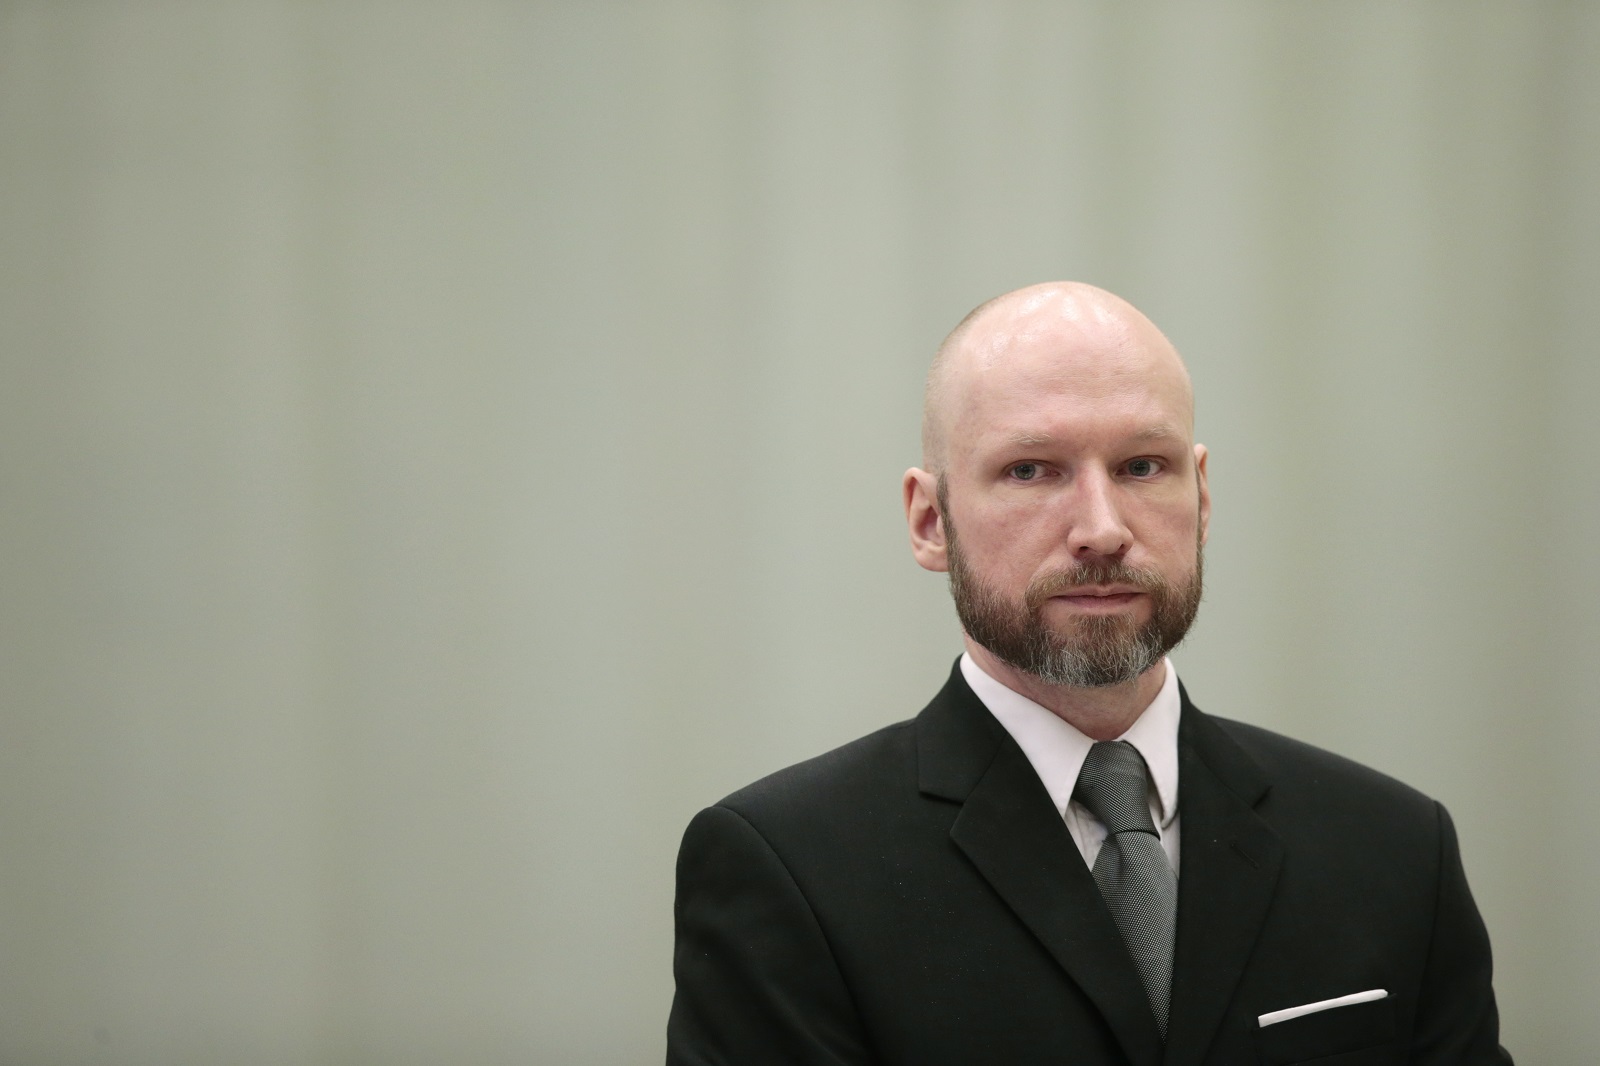 epa09691484 (FILE) - Anders Behring Breivik attends the last day of the appeal case in the Borgarting Court of Appeal at the Telemark prison gym, in Skien, Norway, 18 January 2017 (reissued 17 January 2022). Breivik, who changed his name to Fjotolf Hansen in 2017, is to appear before court for his parole hearing in Oslo on 18 January 2022. Mass murderer Anders Behring Breivik was sentenced to a maximum term of 21 years for killing 77 people in bomb and shooting attacks on 22 July 2011, and is entitled under Norwegian law to have his sentenced reviewed after ten years served.  EPA/LISE AASERUD NORWAY OUT *** Local Caption *** 53252761